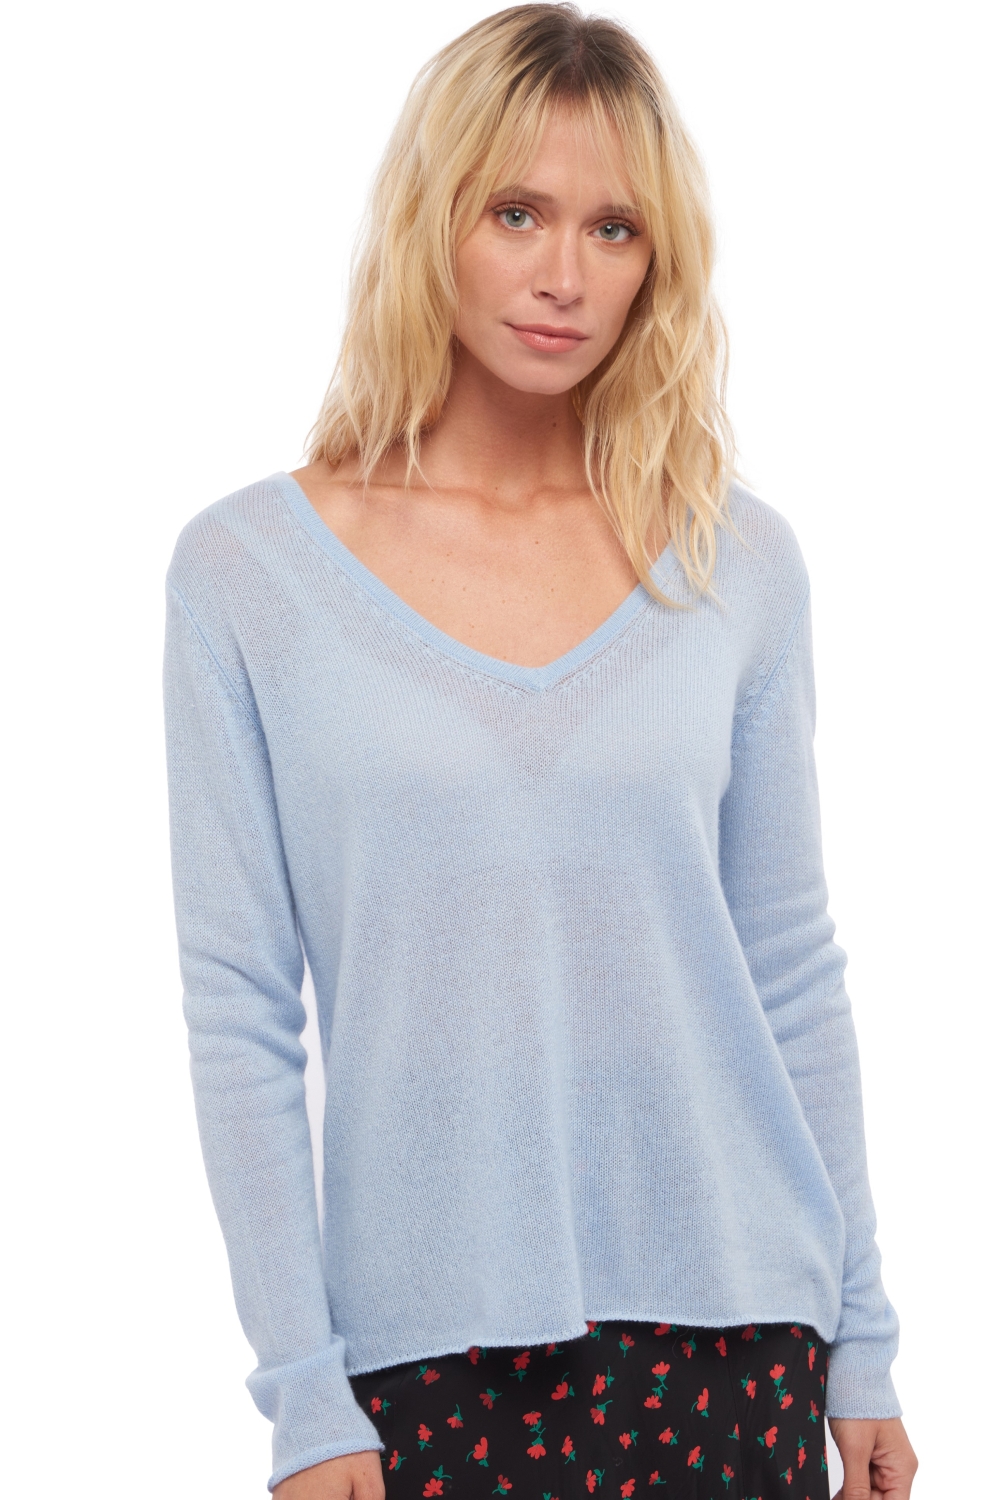 Cashmere ladies basic sweaters at low prices flavie ciel 3xl